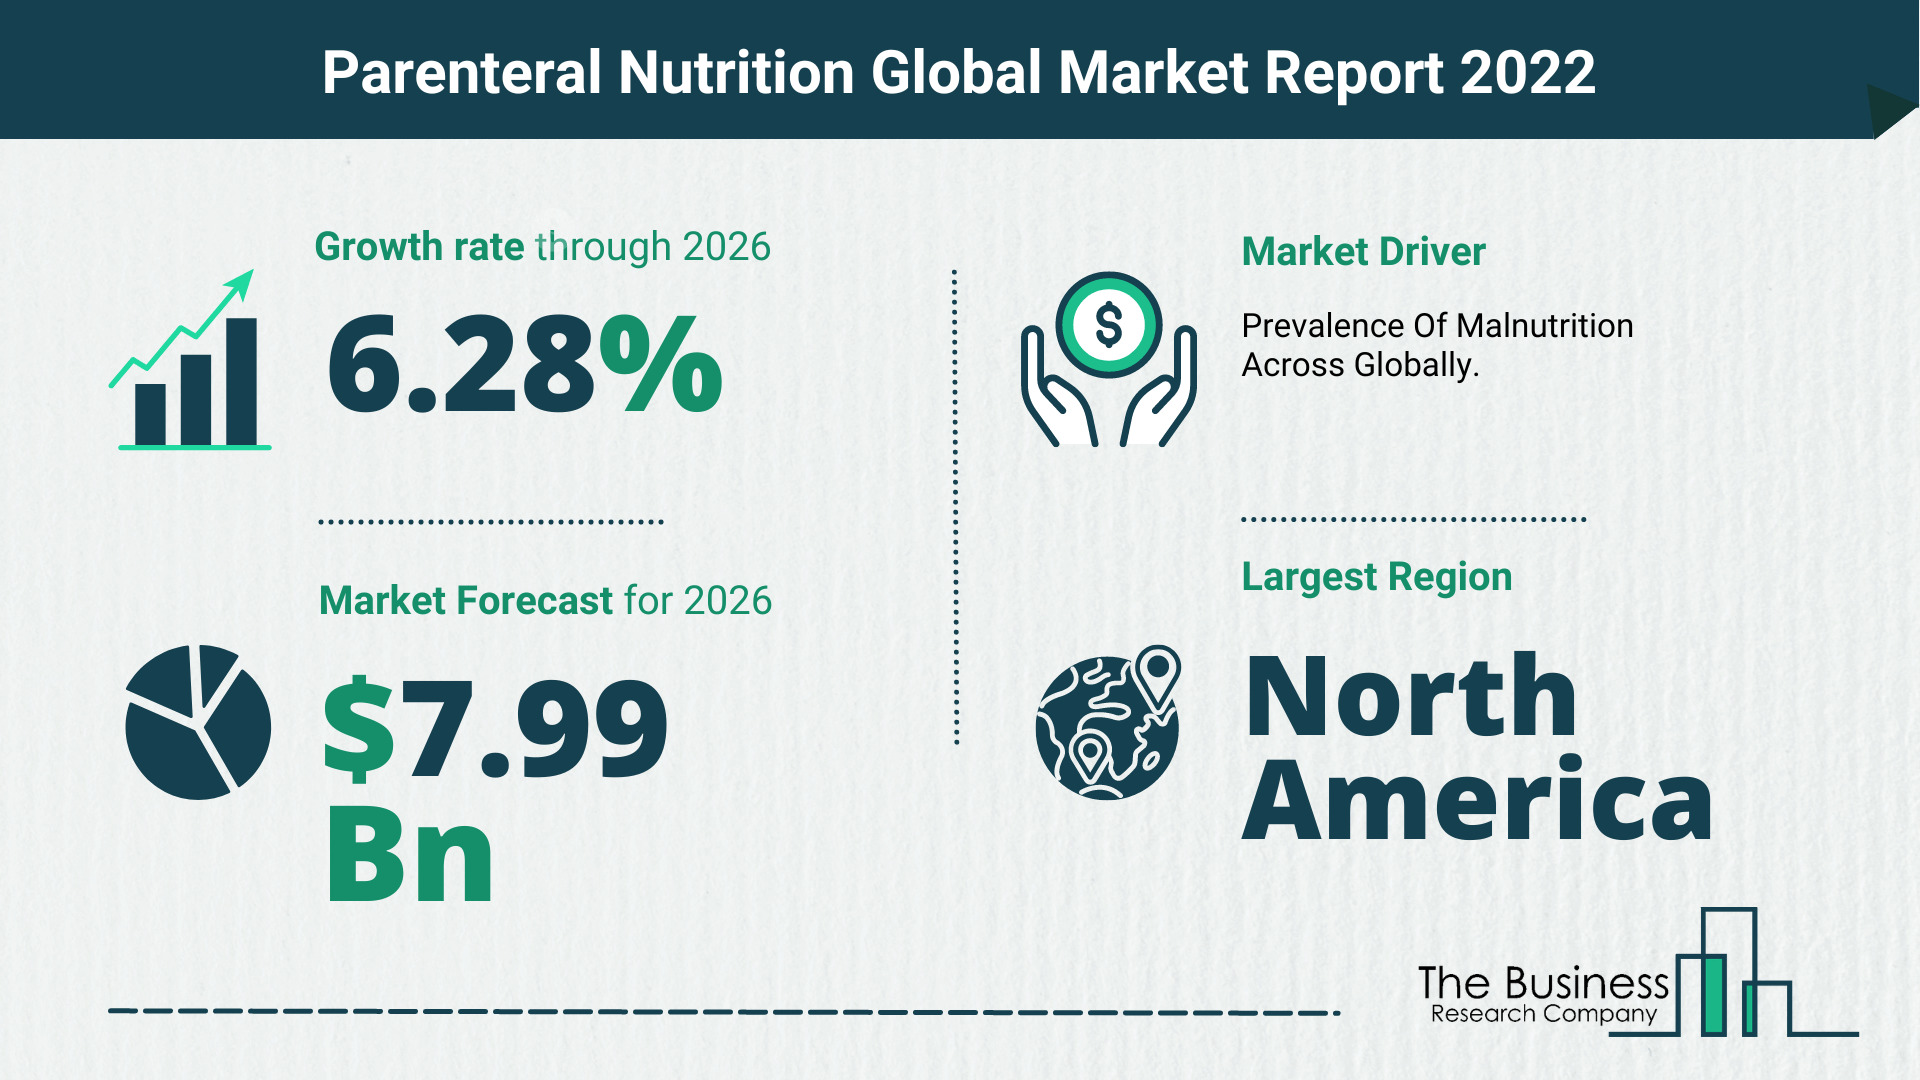 What Is The Parenteral Nutrition Market Overview In 2022?